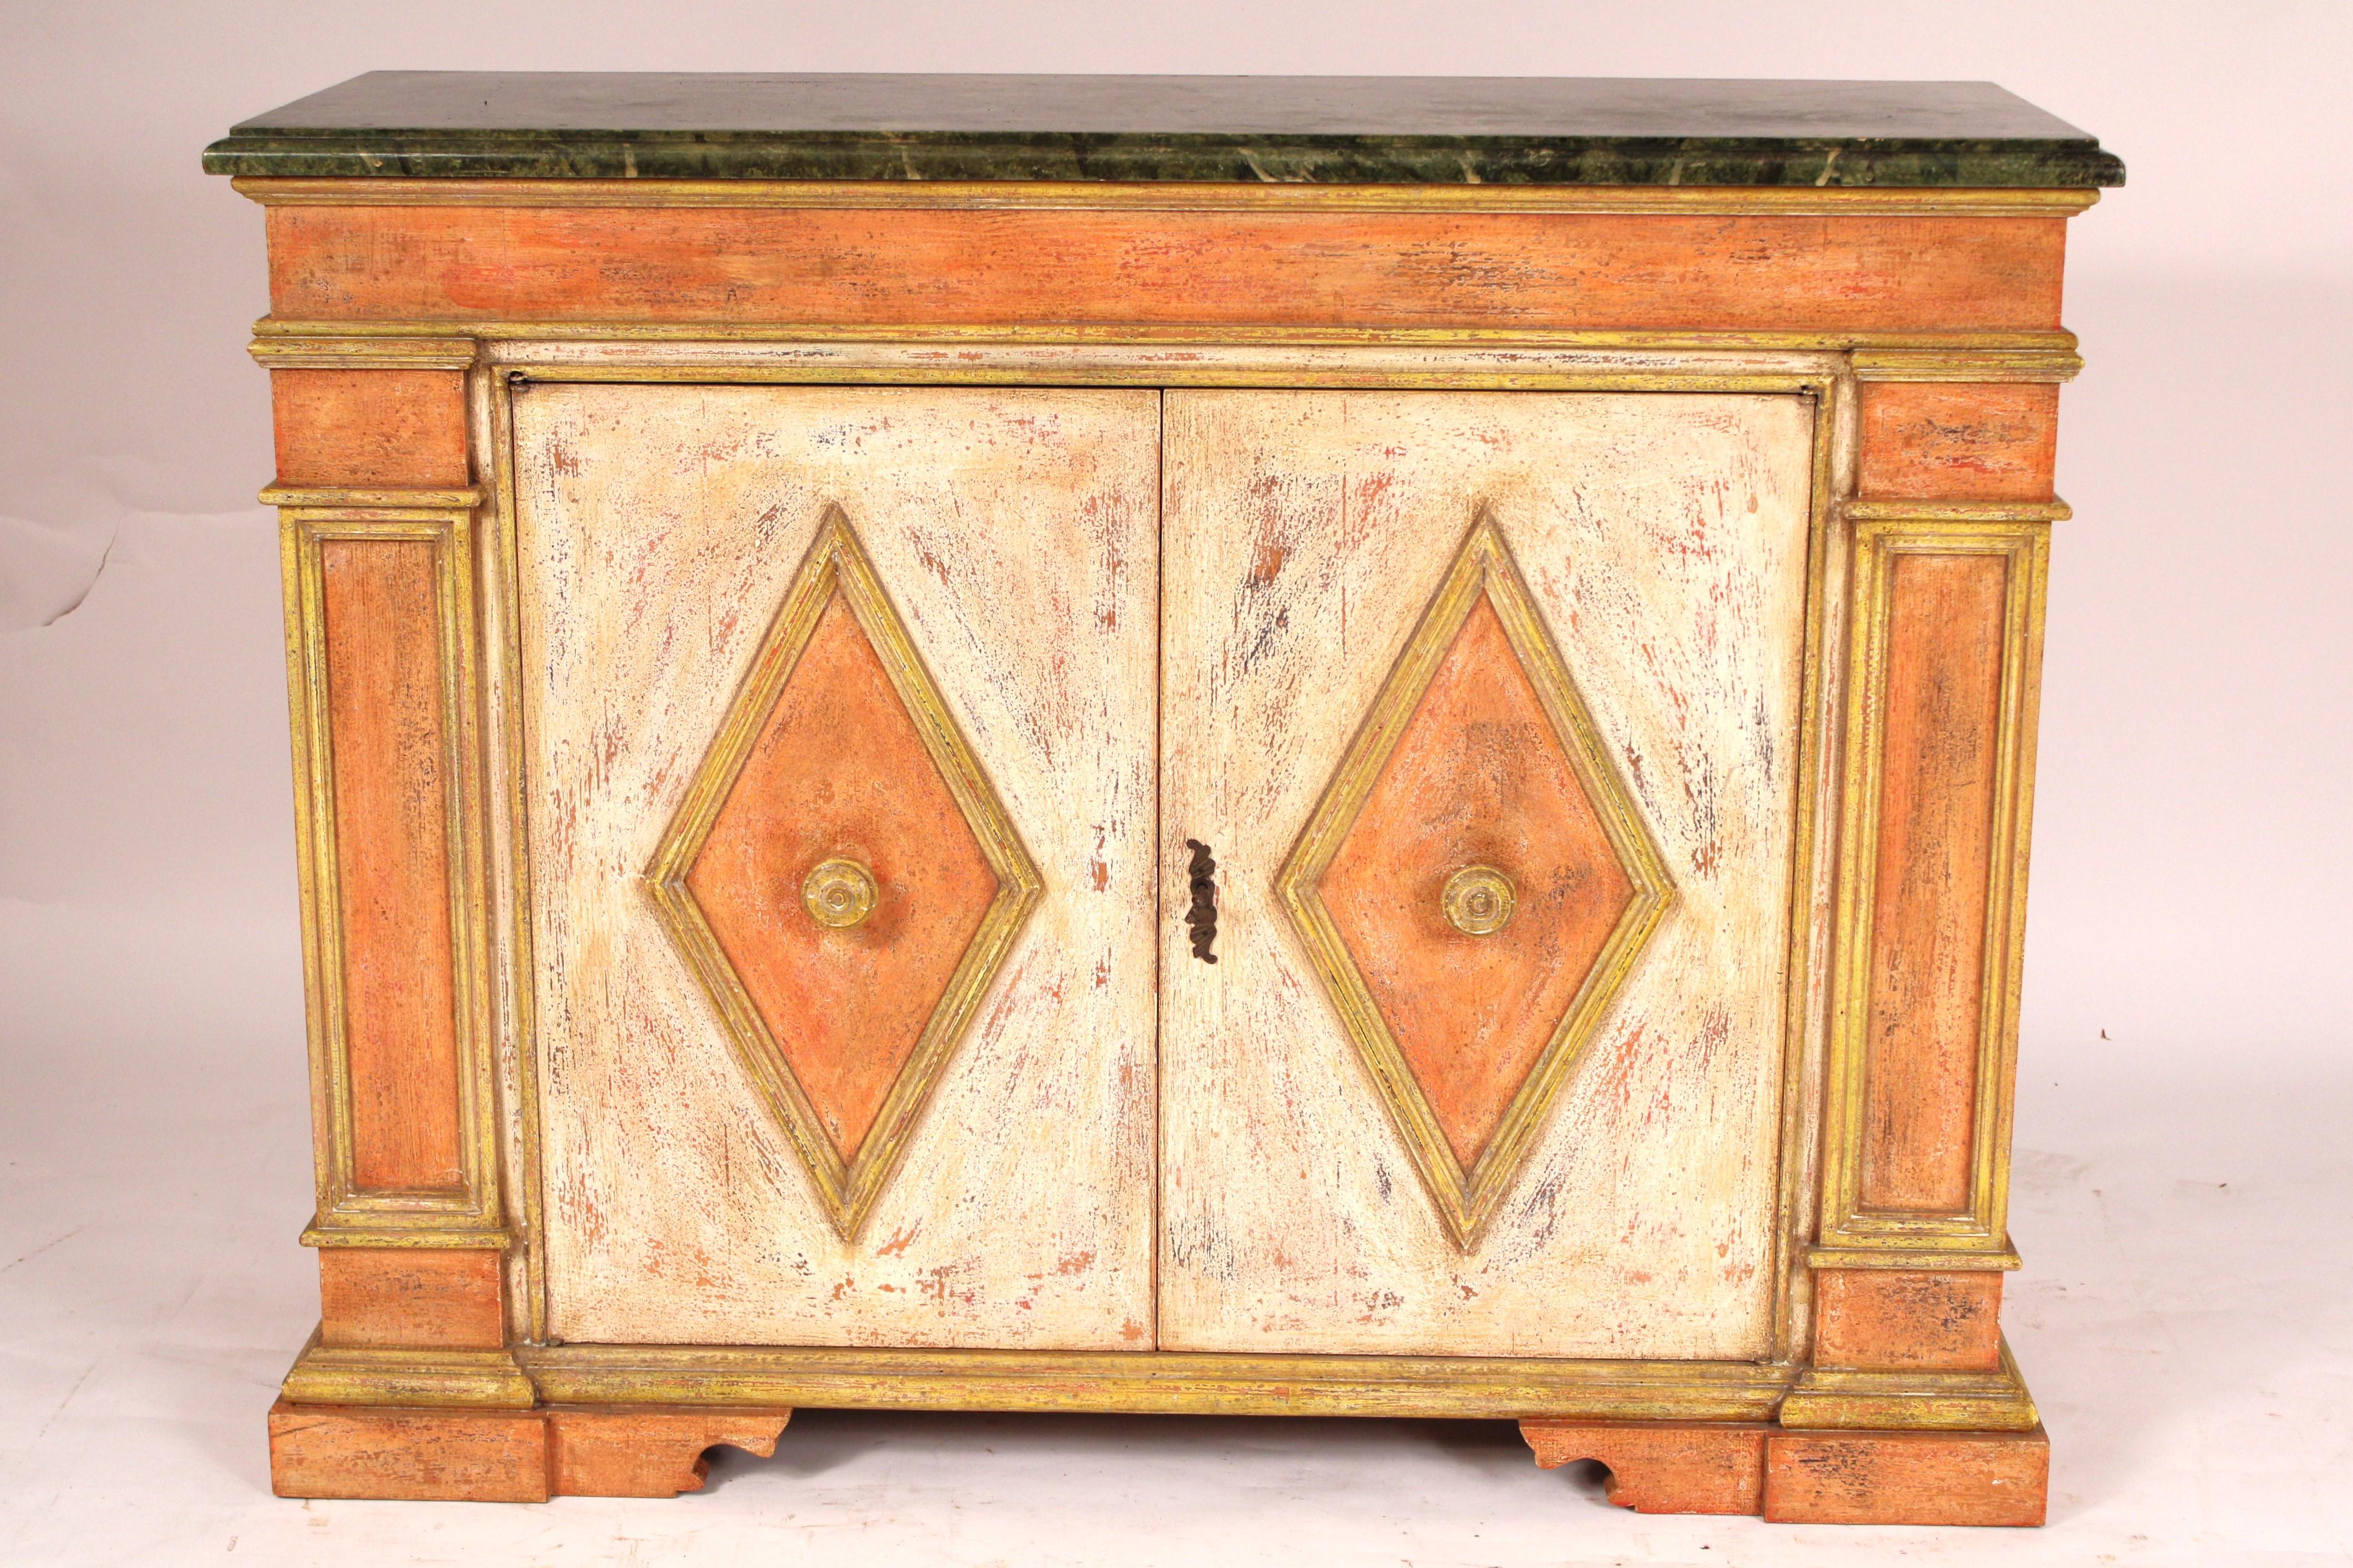 Italian baroque style painted credenza, late 20th century. With a green faux marble top, the front with two doors with molded diamond shaped panels
inset with wood knobs, resting on a plinth base. The inside with green paint and a shelf.